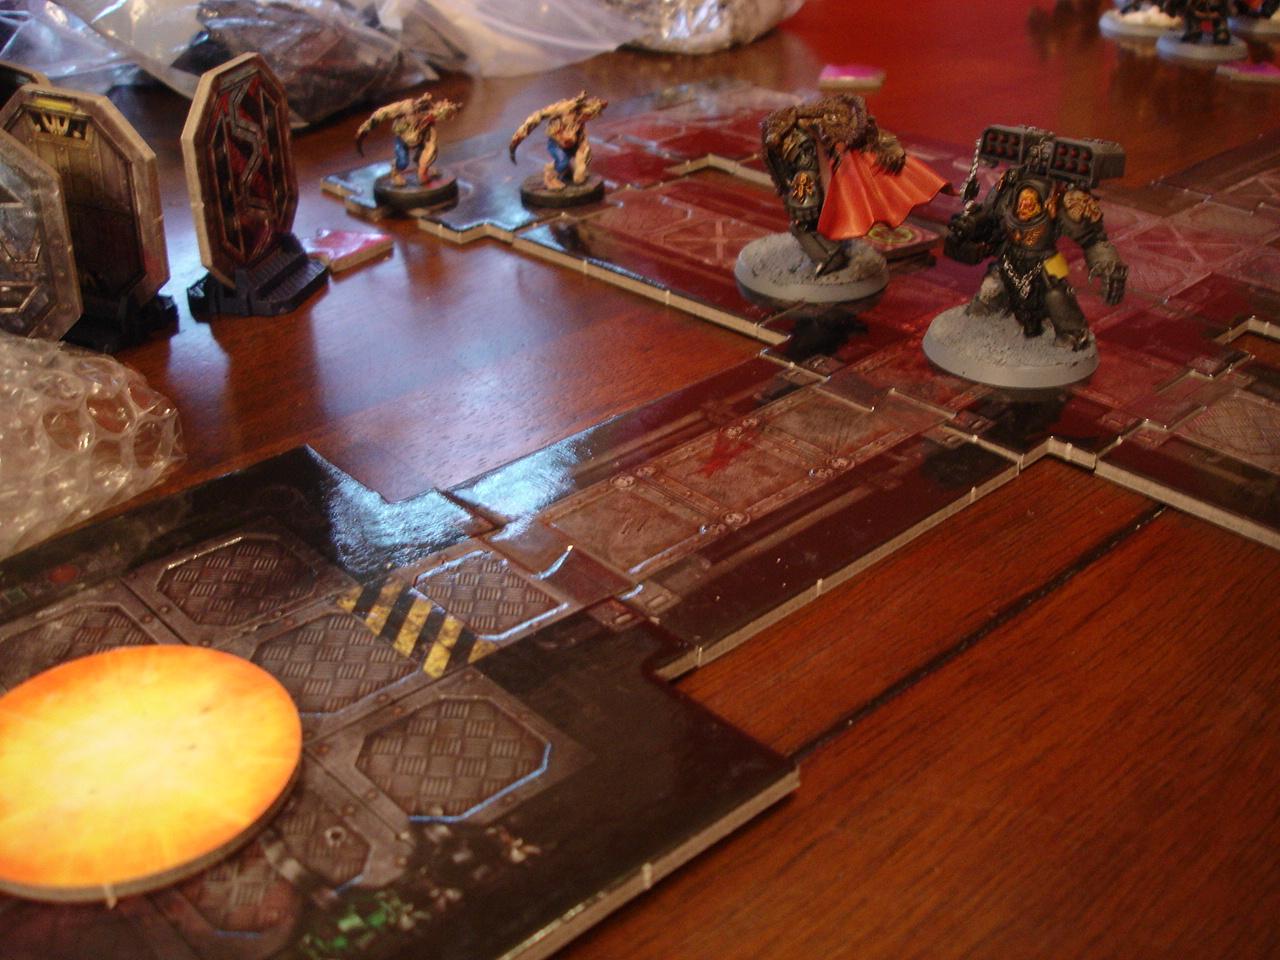 Space Hulk, space wolves vs. zombies in the depths of space